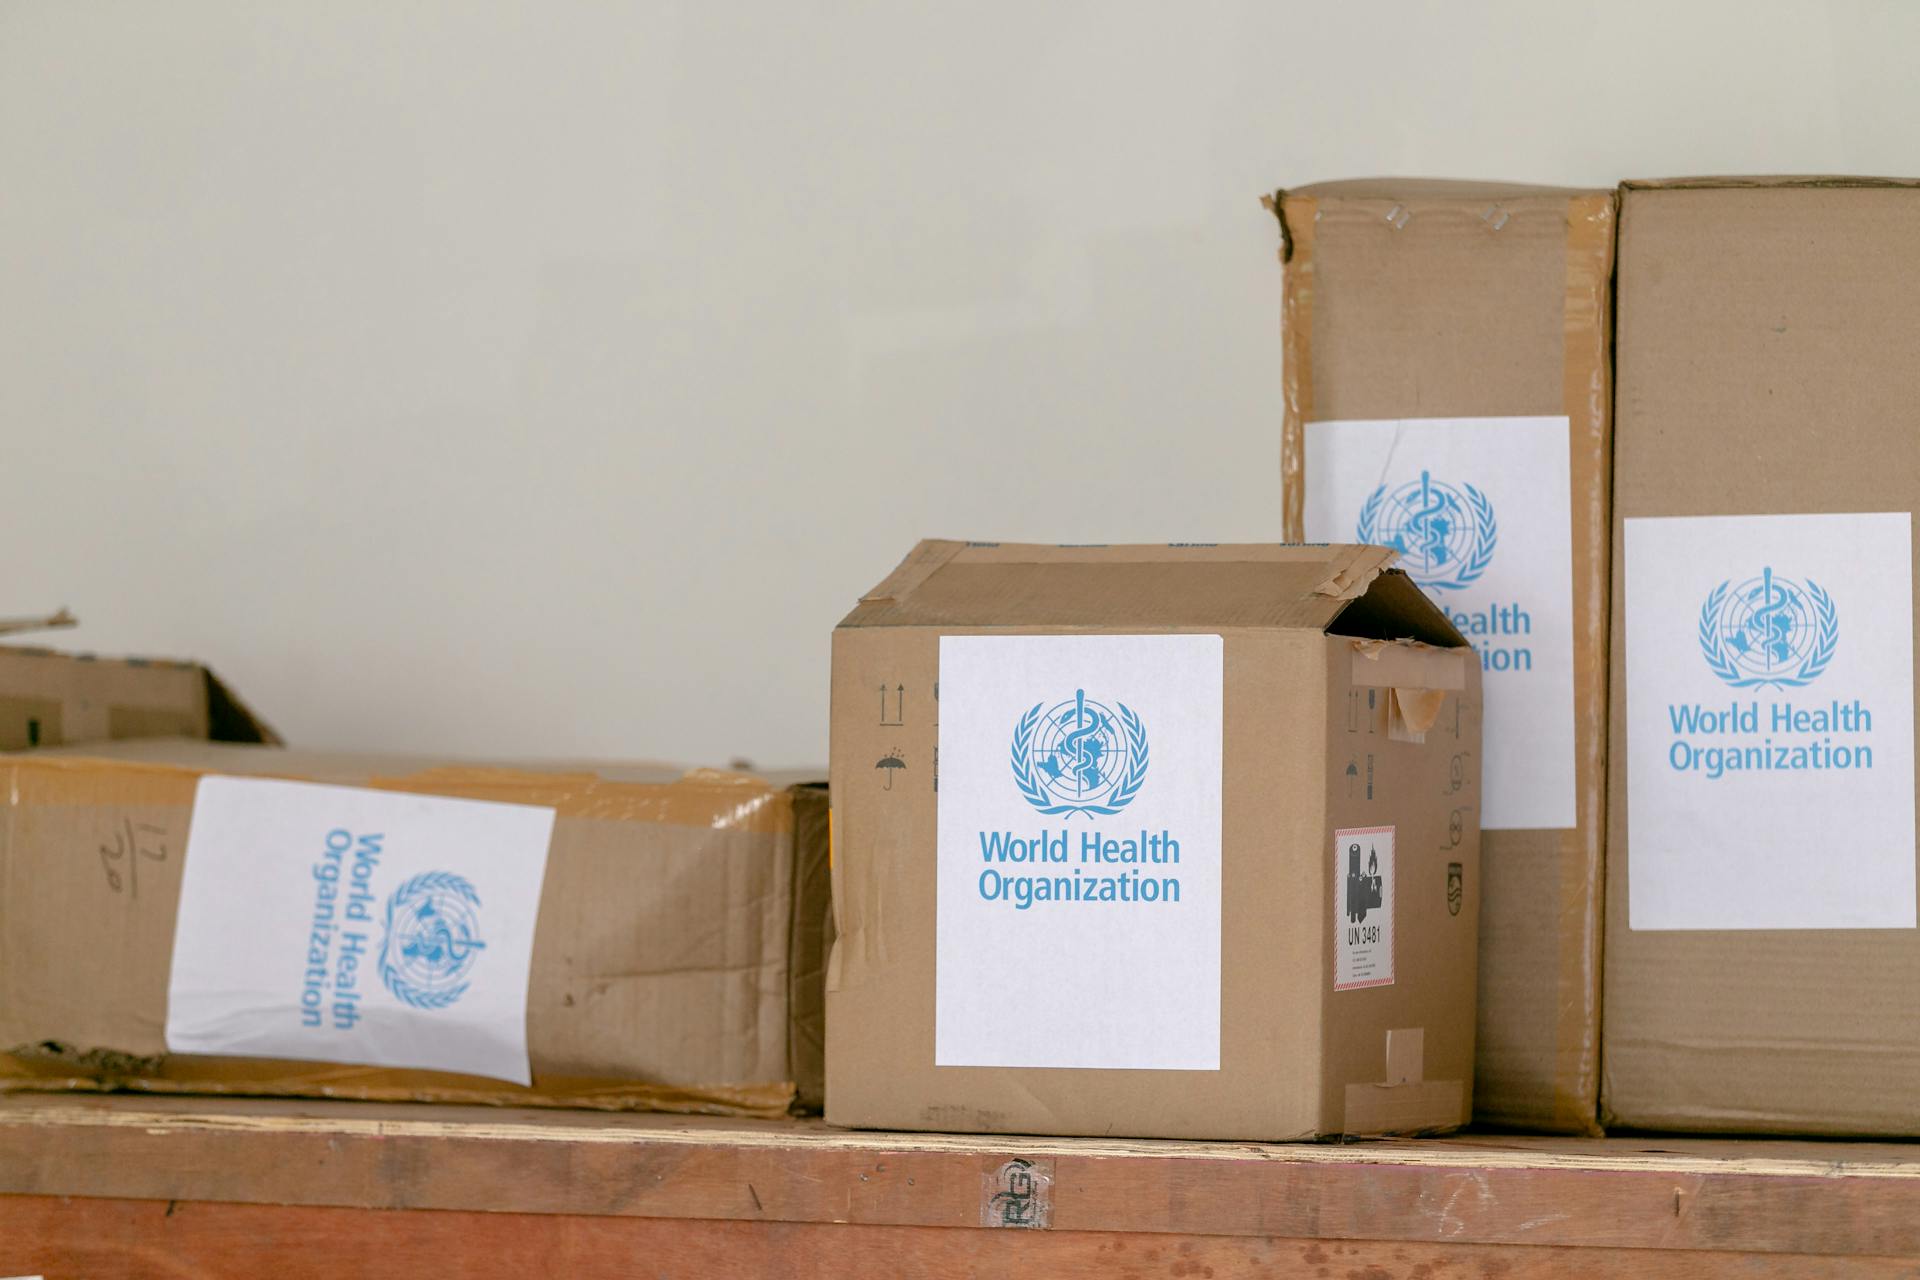 Blue emblem sticker of World Health Organization on carton boxes heaped on table